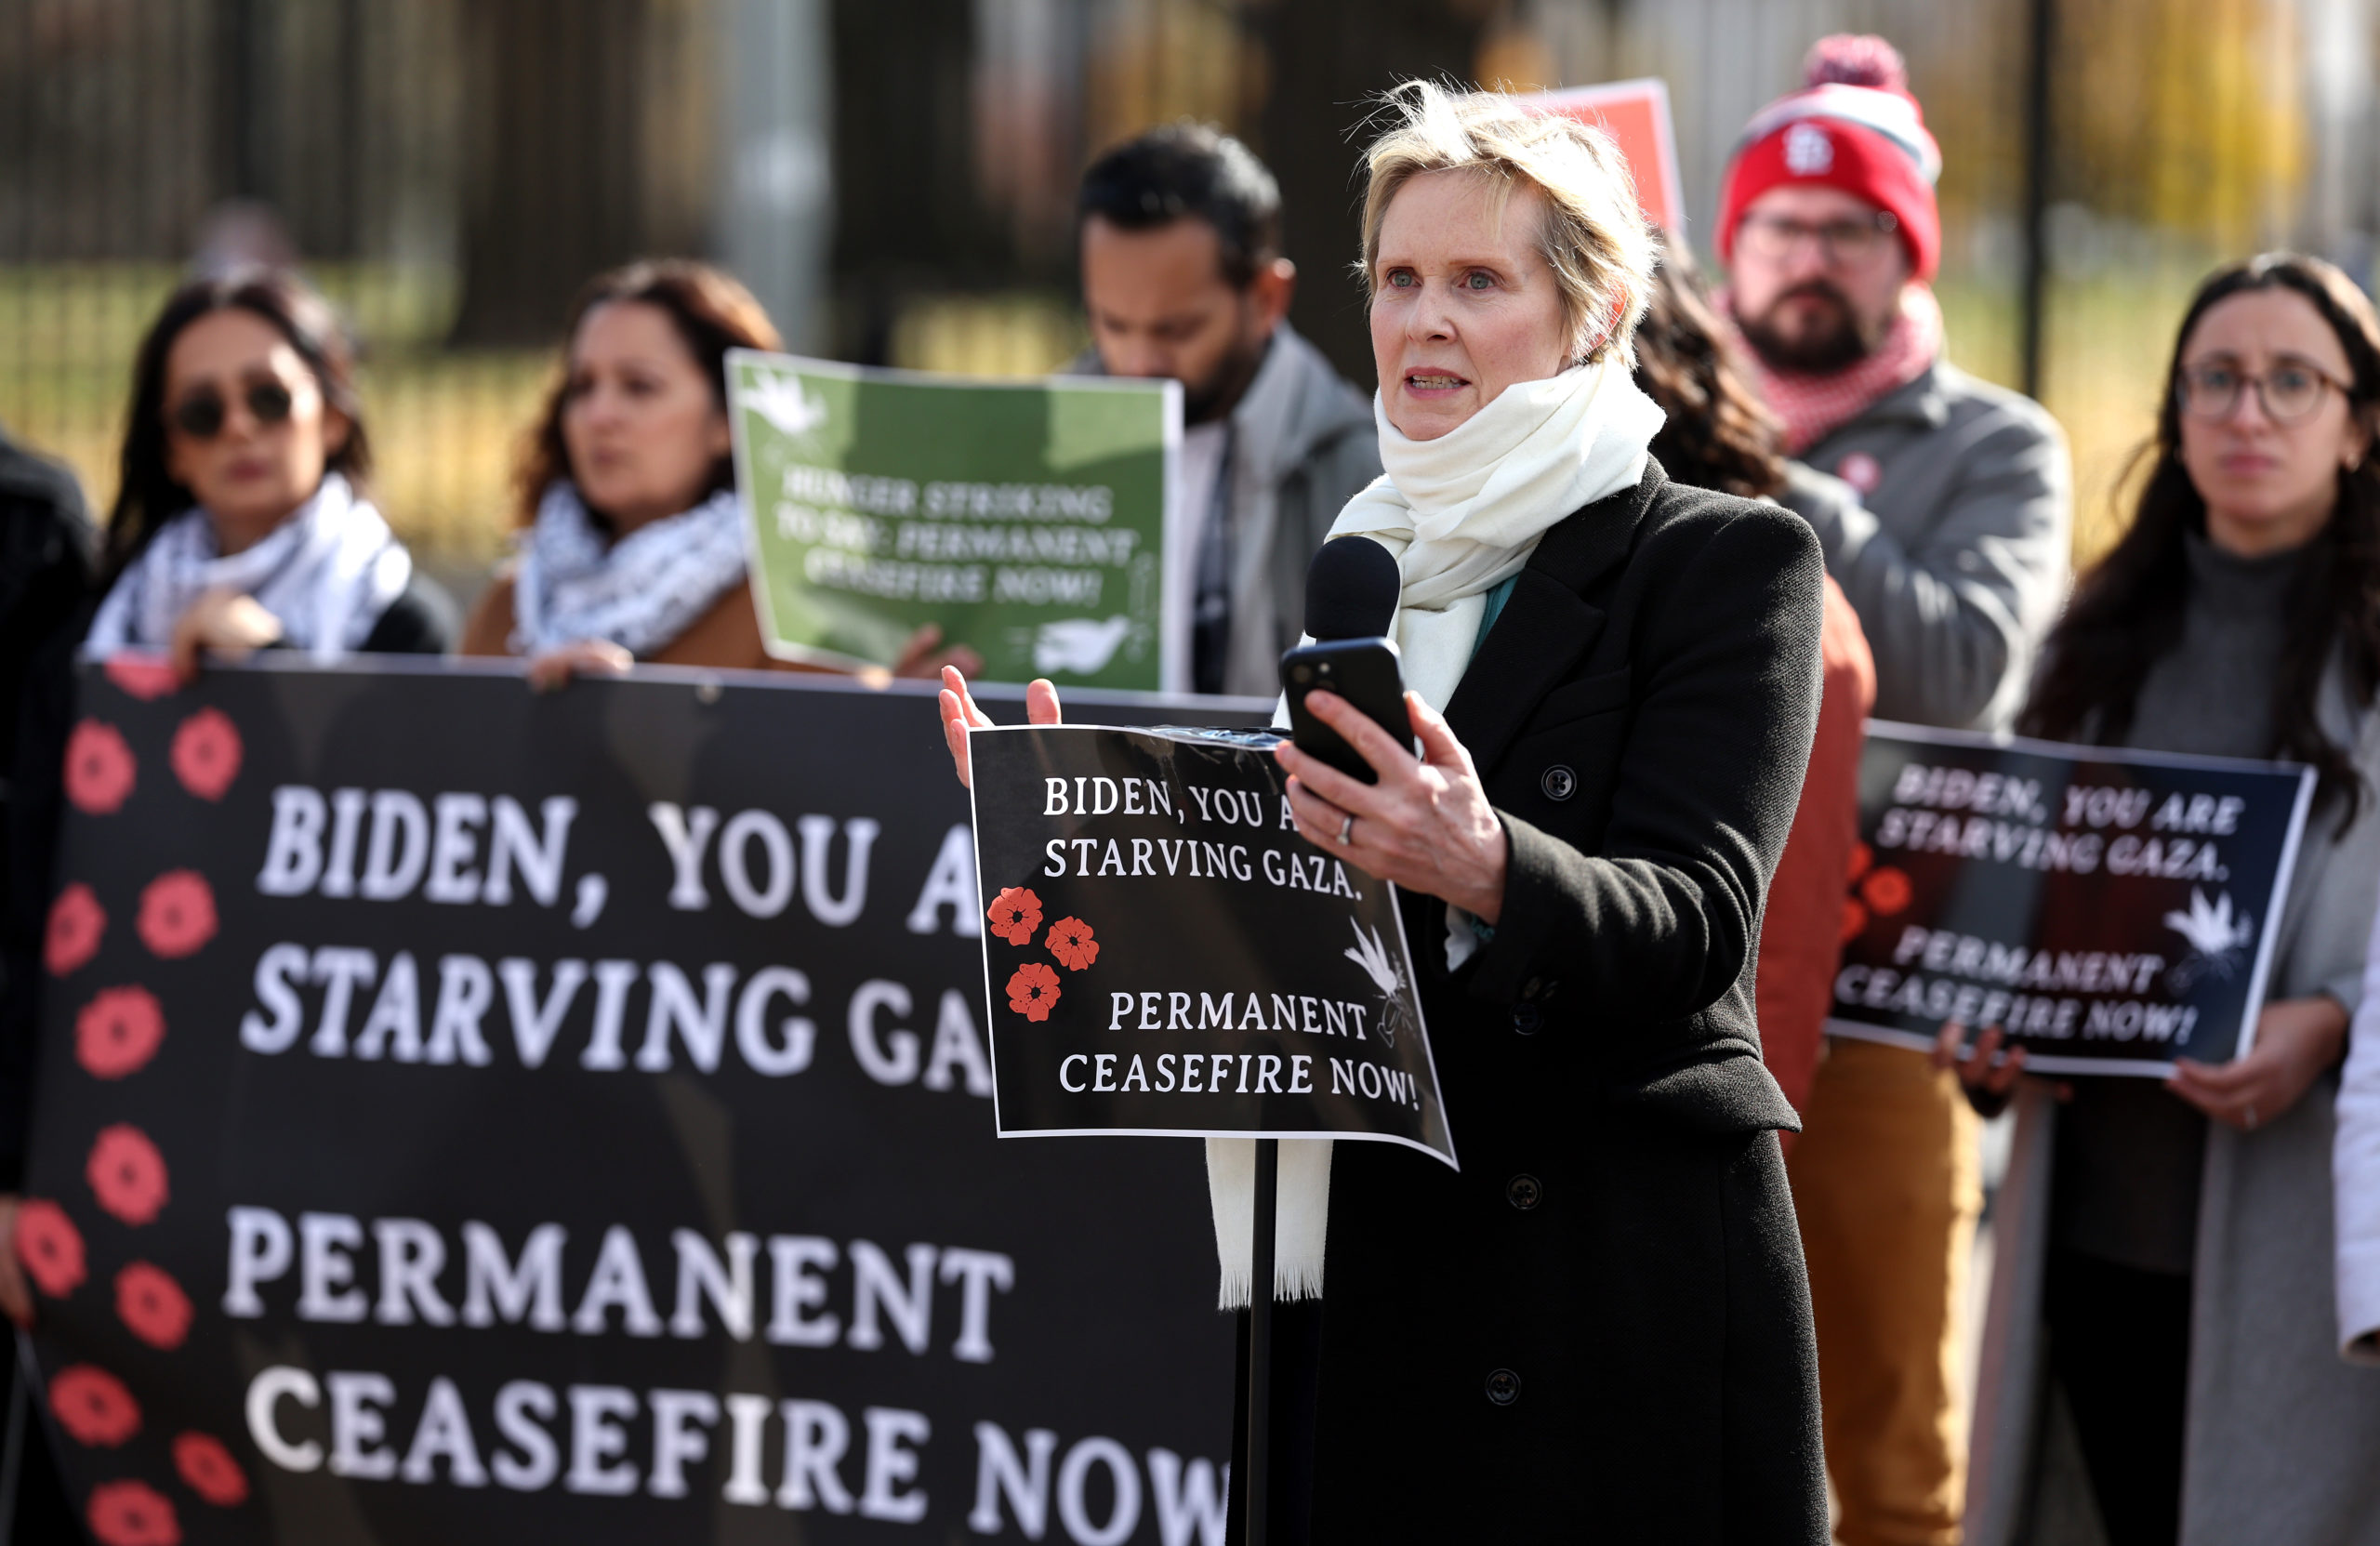 Actress Cynthia Nixon speaks as she announces a hunger strike calling for a ceasefire in Gaza outside the White House on November 27, 2023 in Washington, DC. Nixon, who was joined by state legislators, community leaders and activist, demands that President Biden call for a permanent ceasefire in the Israel-Hamas war and stops military aid to Israel. (Photo by Kevin Dietsch/Getty Images)